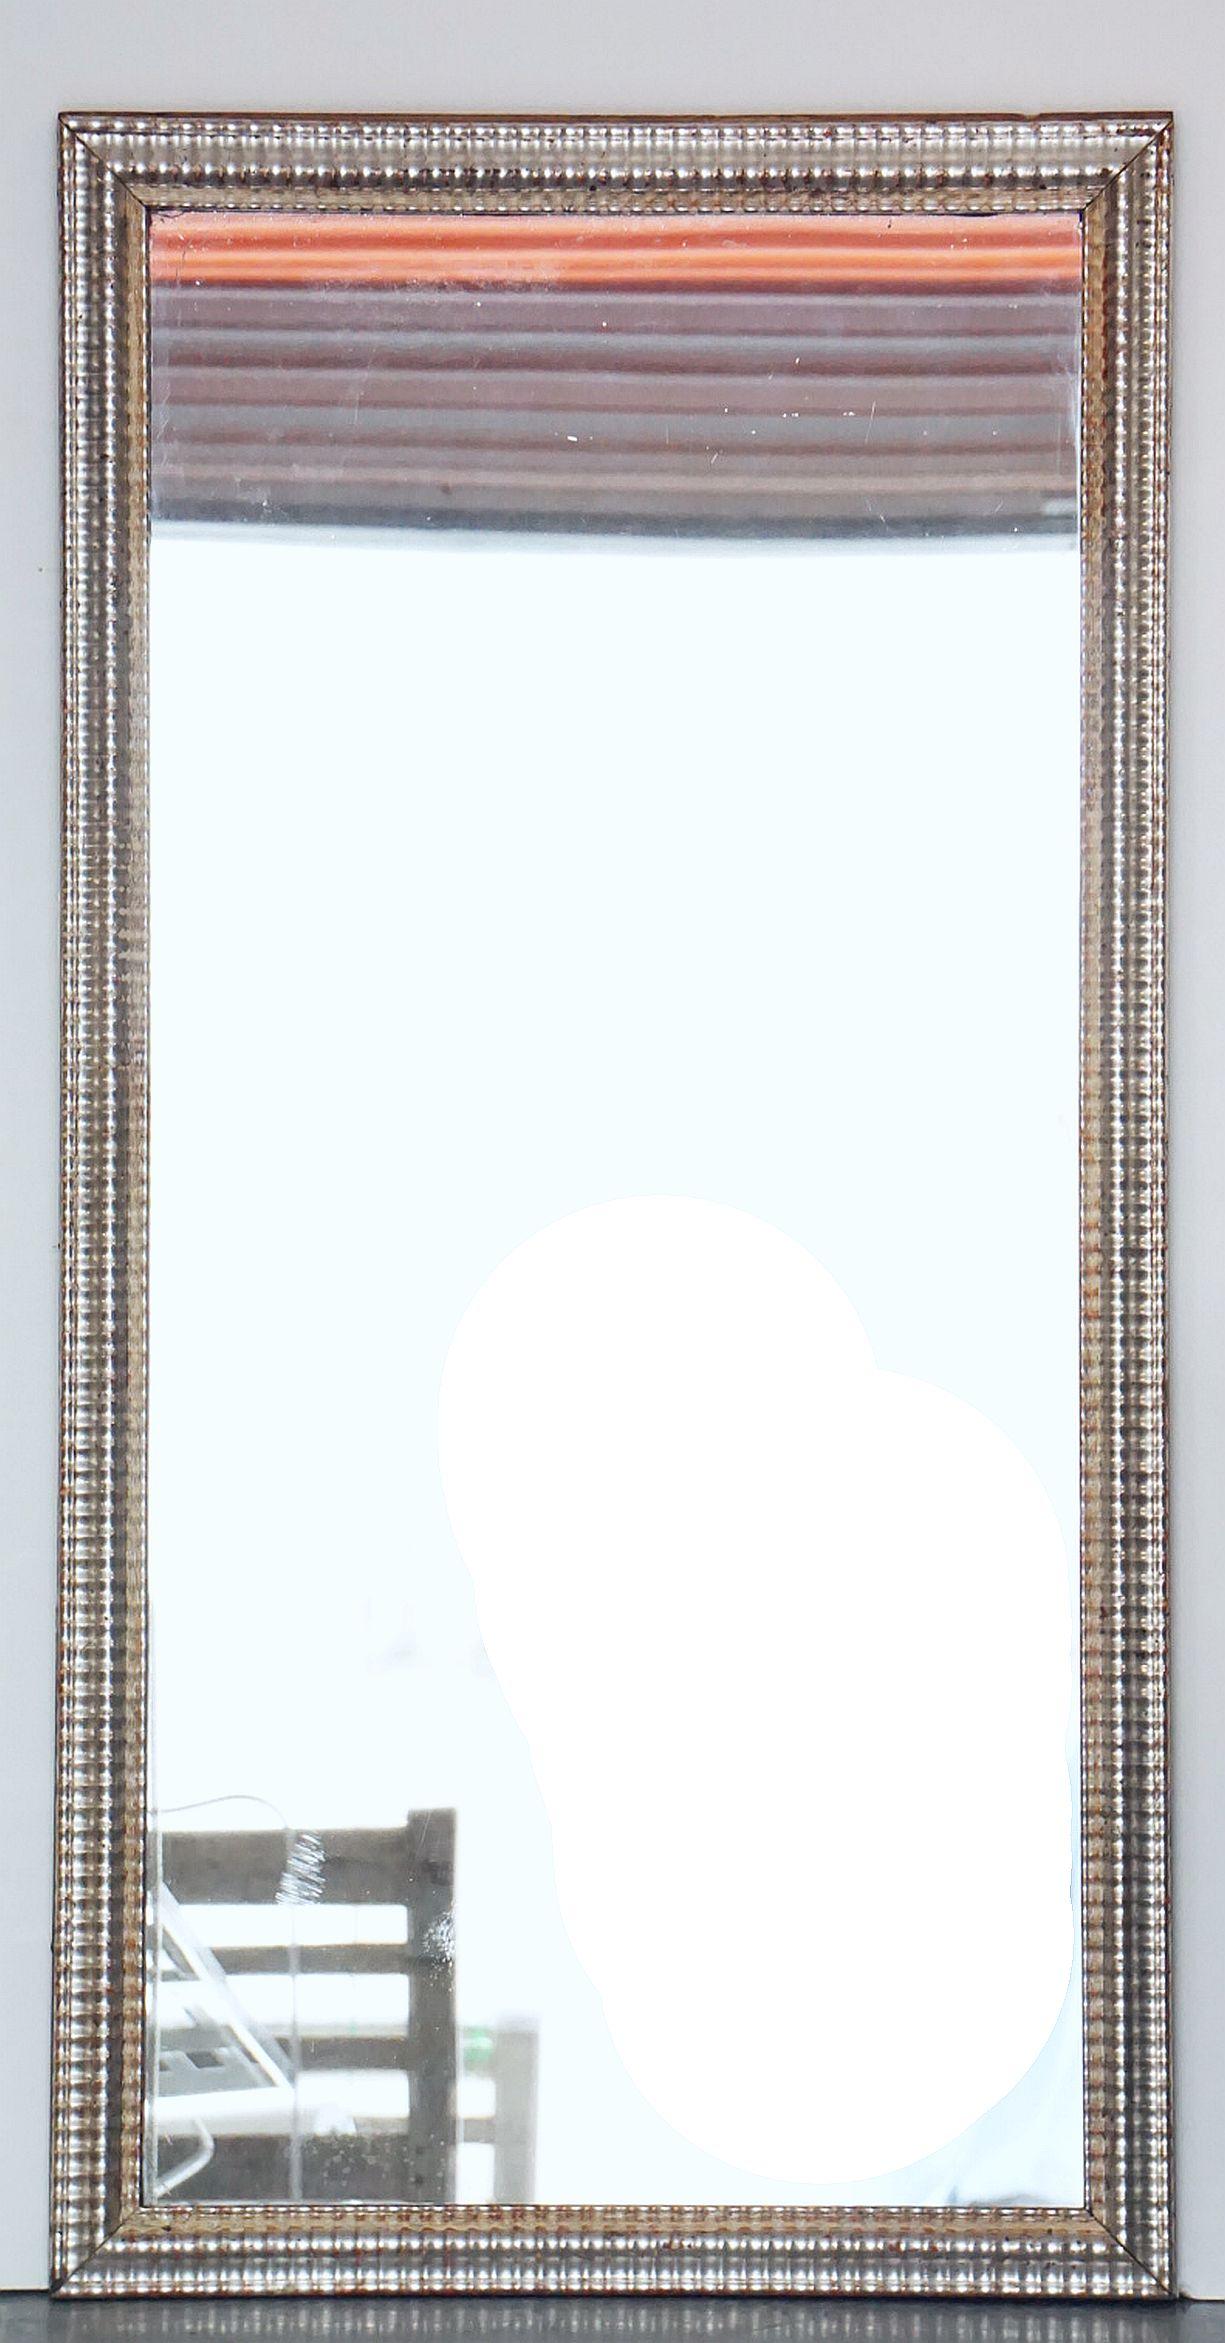 A handsome large French silver gilt rectangular wall mirror, with original glass, featuring a decorative raised, ripple edged moulding around the circumference of the frame and a lovely patina.

Ready to hang - Can be displayed vertically (portrait)